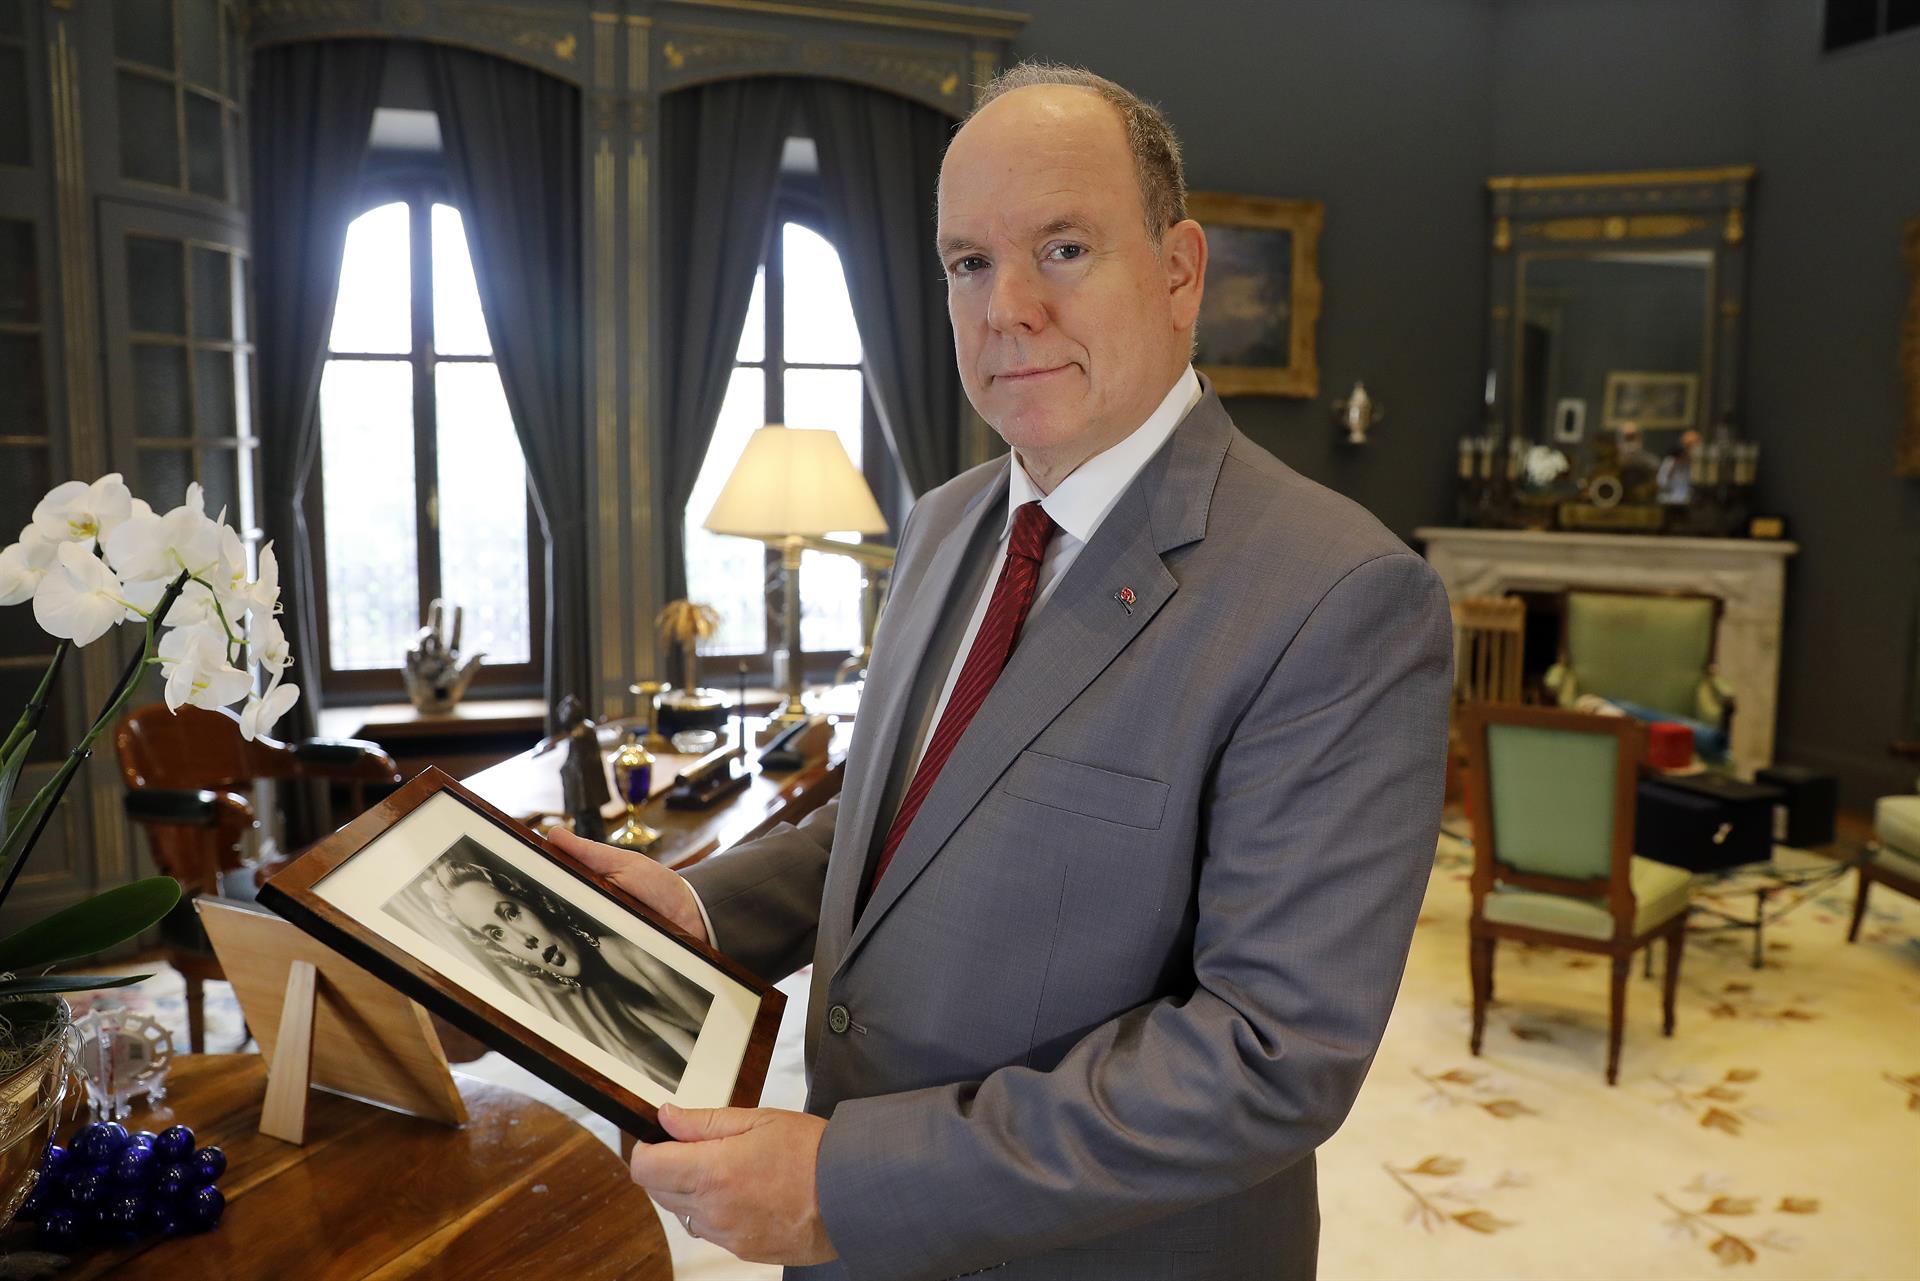 Prince Albert II of Monaco during an interview with Efe at the Monaco Palace, in Monaco, 14 June 2022 (issued 10 September 2022). EFE/EPA/SEBASTIEN NOGIER